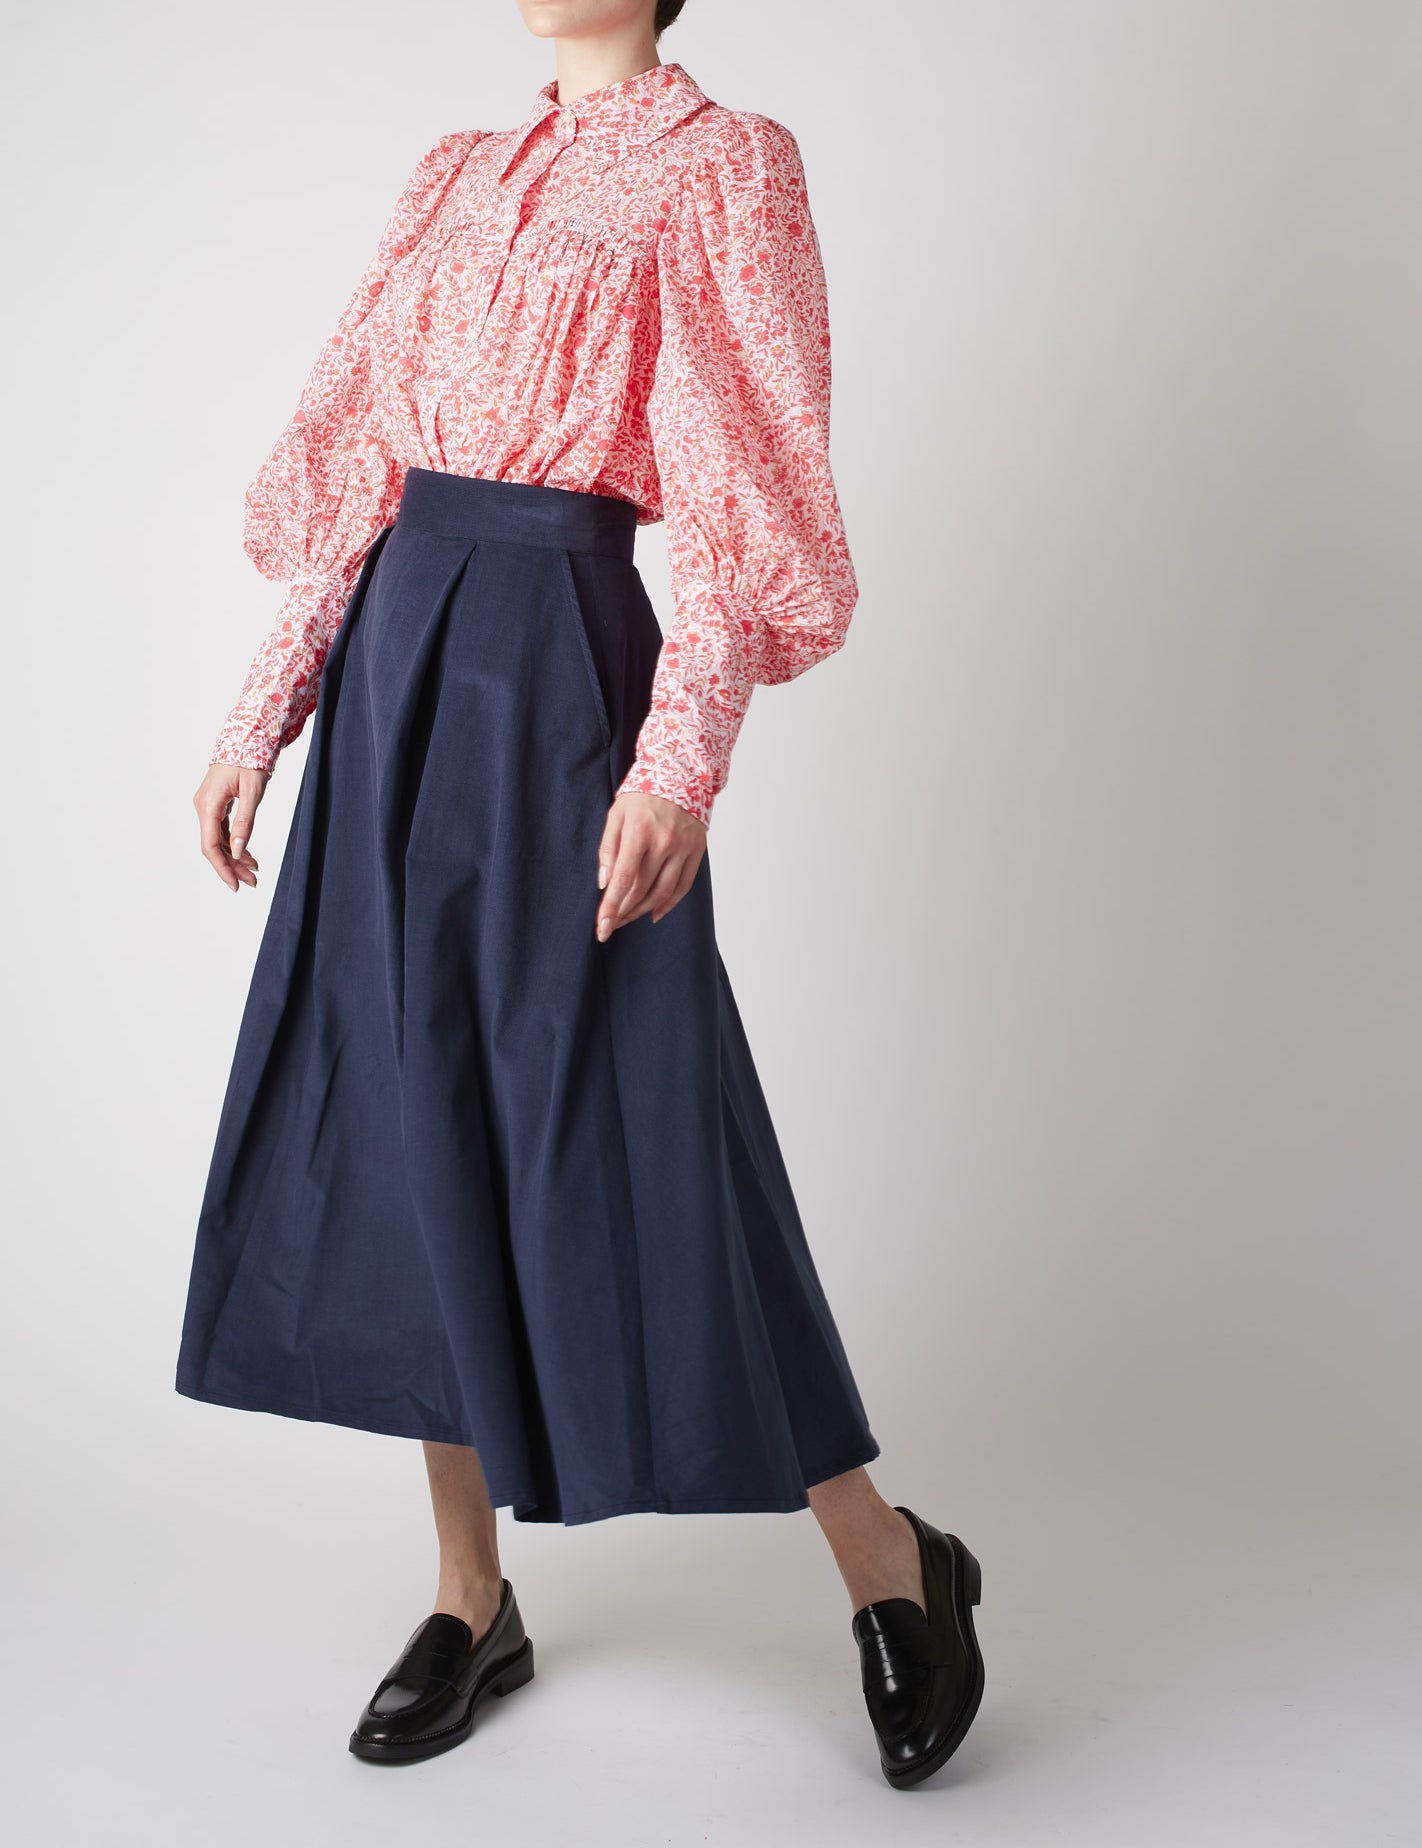 Large view of Wallis Raspberry Floral Jaal Blouse with a Wynona skirt by Thierry Colson